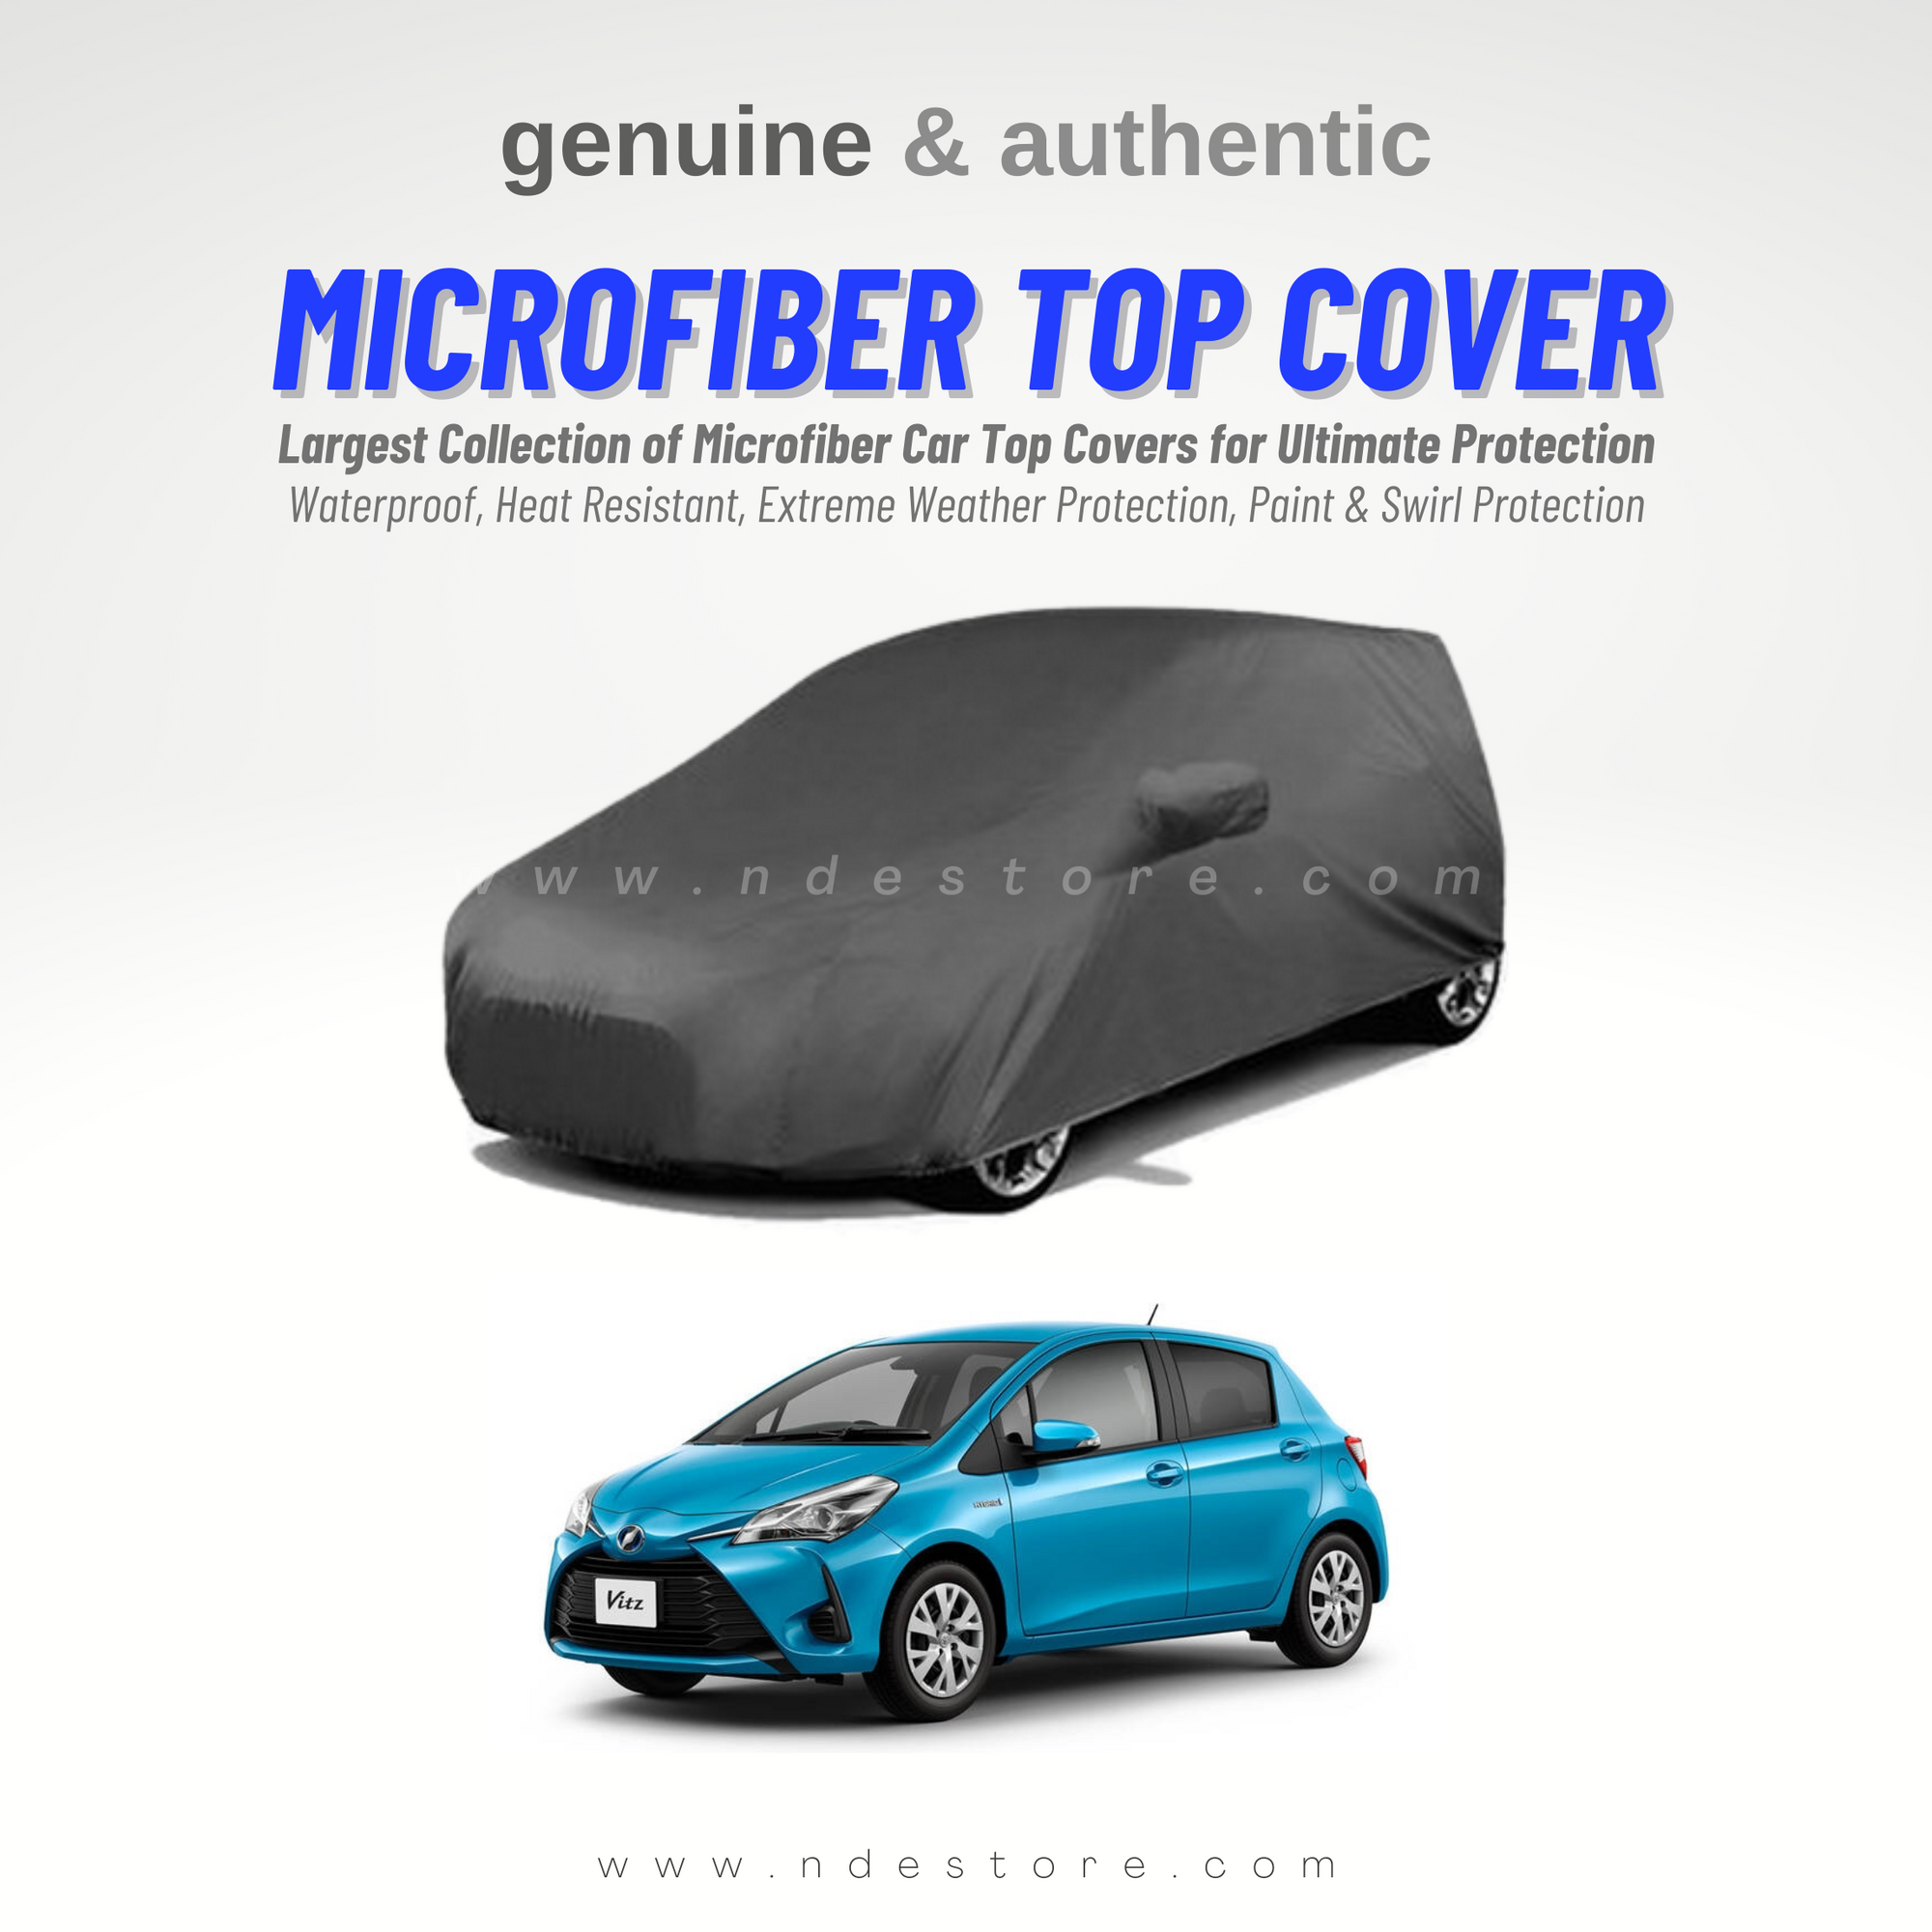 TOP COVER MICROFIBER FOR TOYOTA VITZ (ALL MODELS)